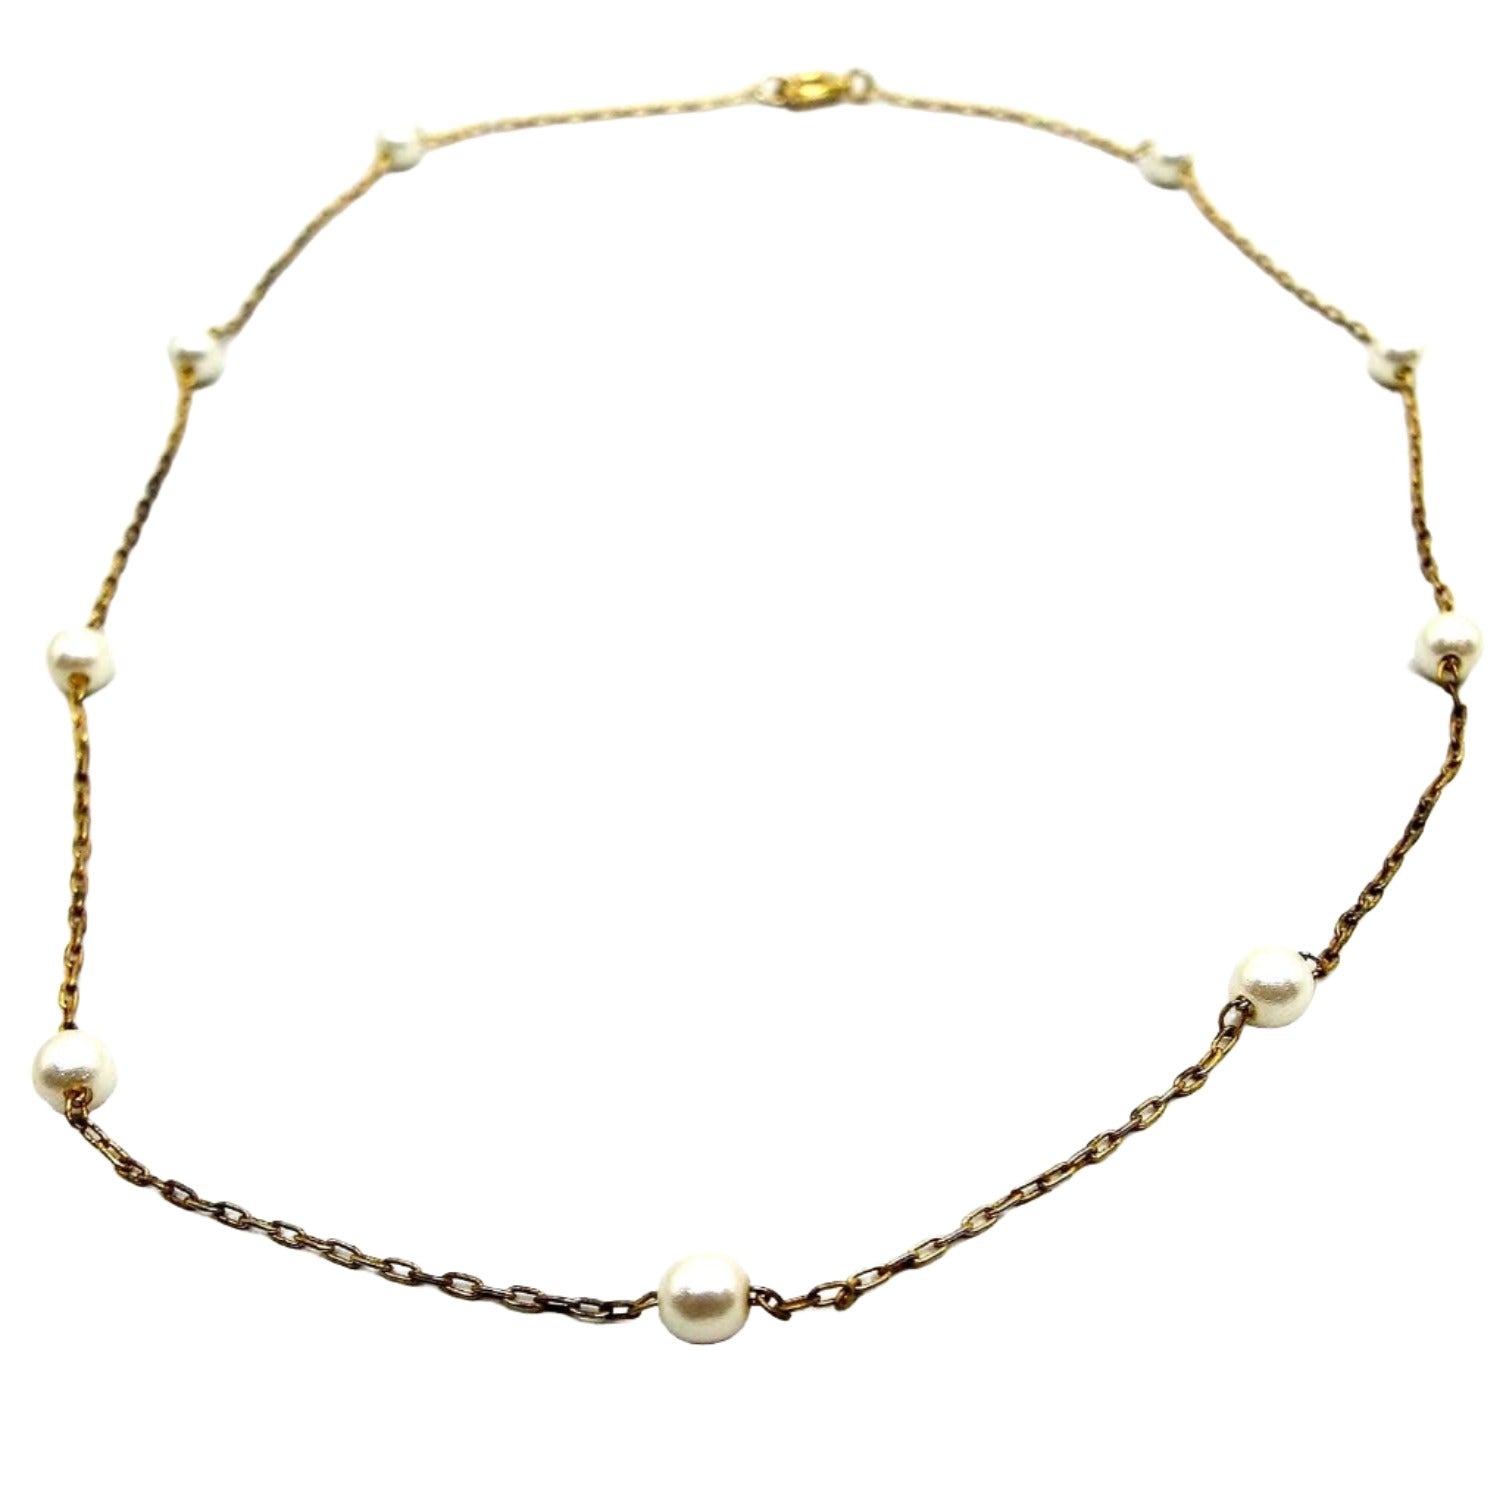 Front view of the retro vintage faux pearl beaded chain necklace. The chain is thin oval cable link and gold tone in color. There is a spring ring clasp at the end. There are nine small round off white glass imitation pearls spread out along the chain.